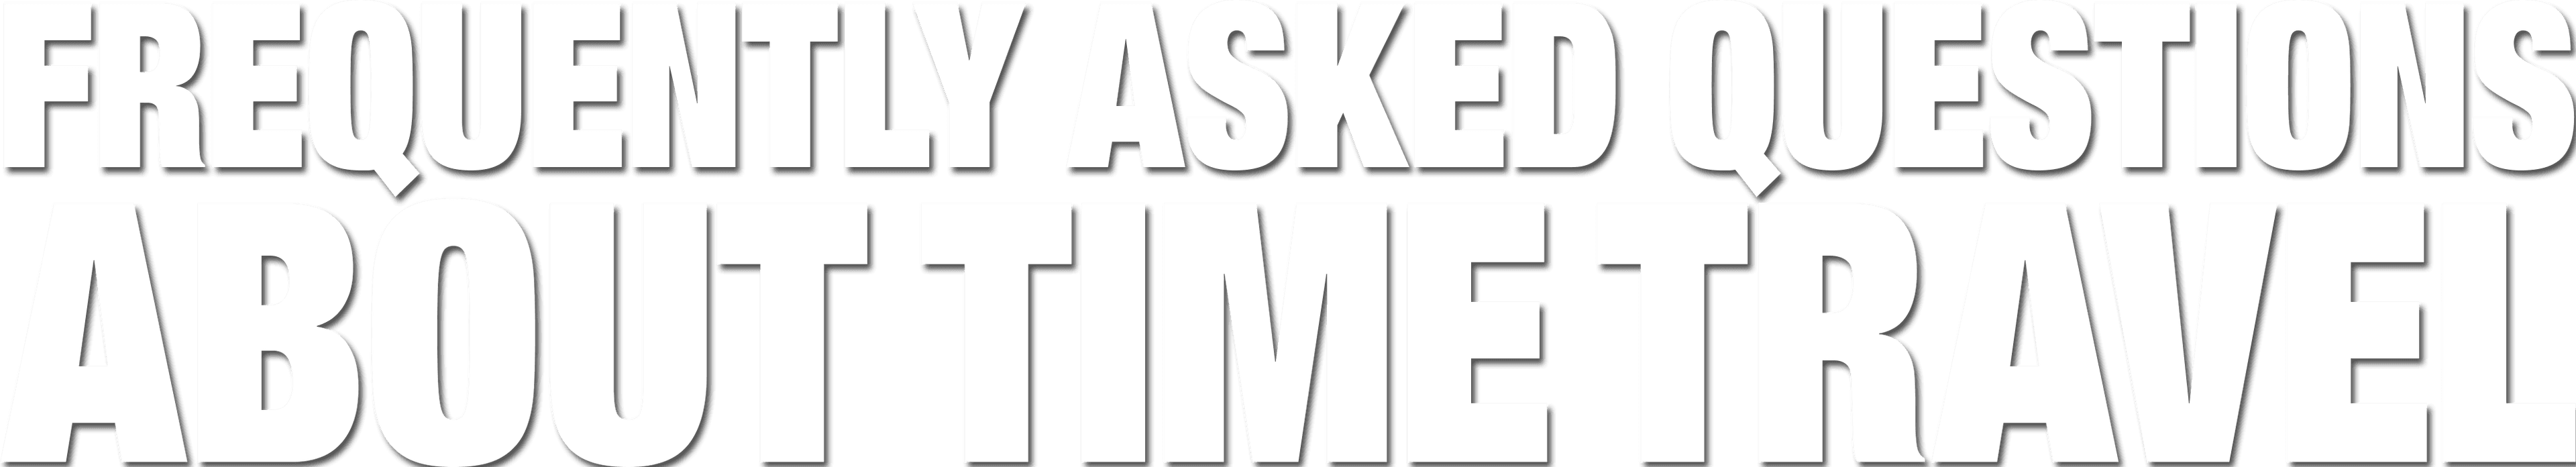 Frequently Asked Questions About Time Travel logo